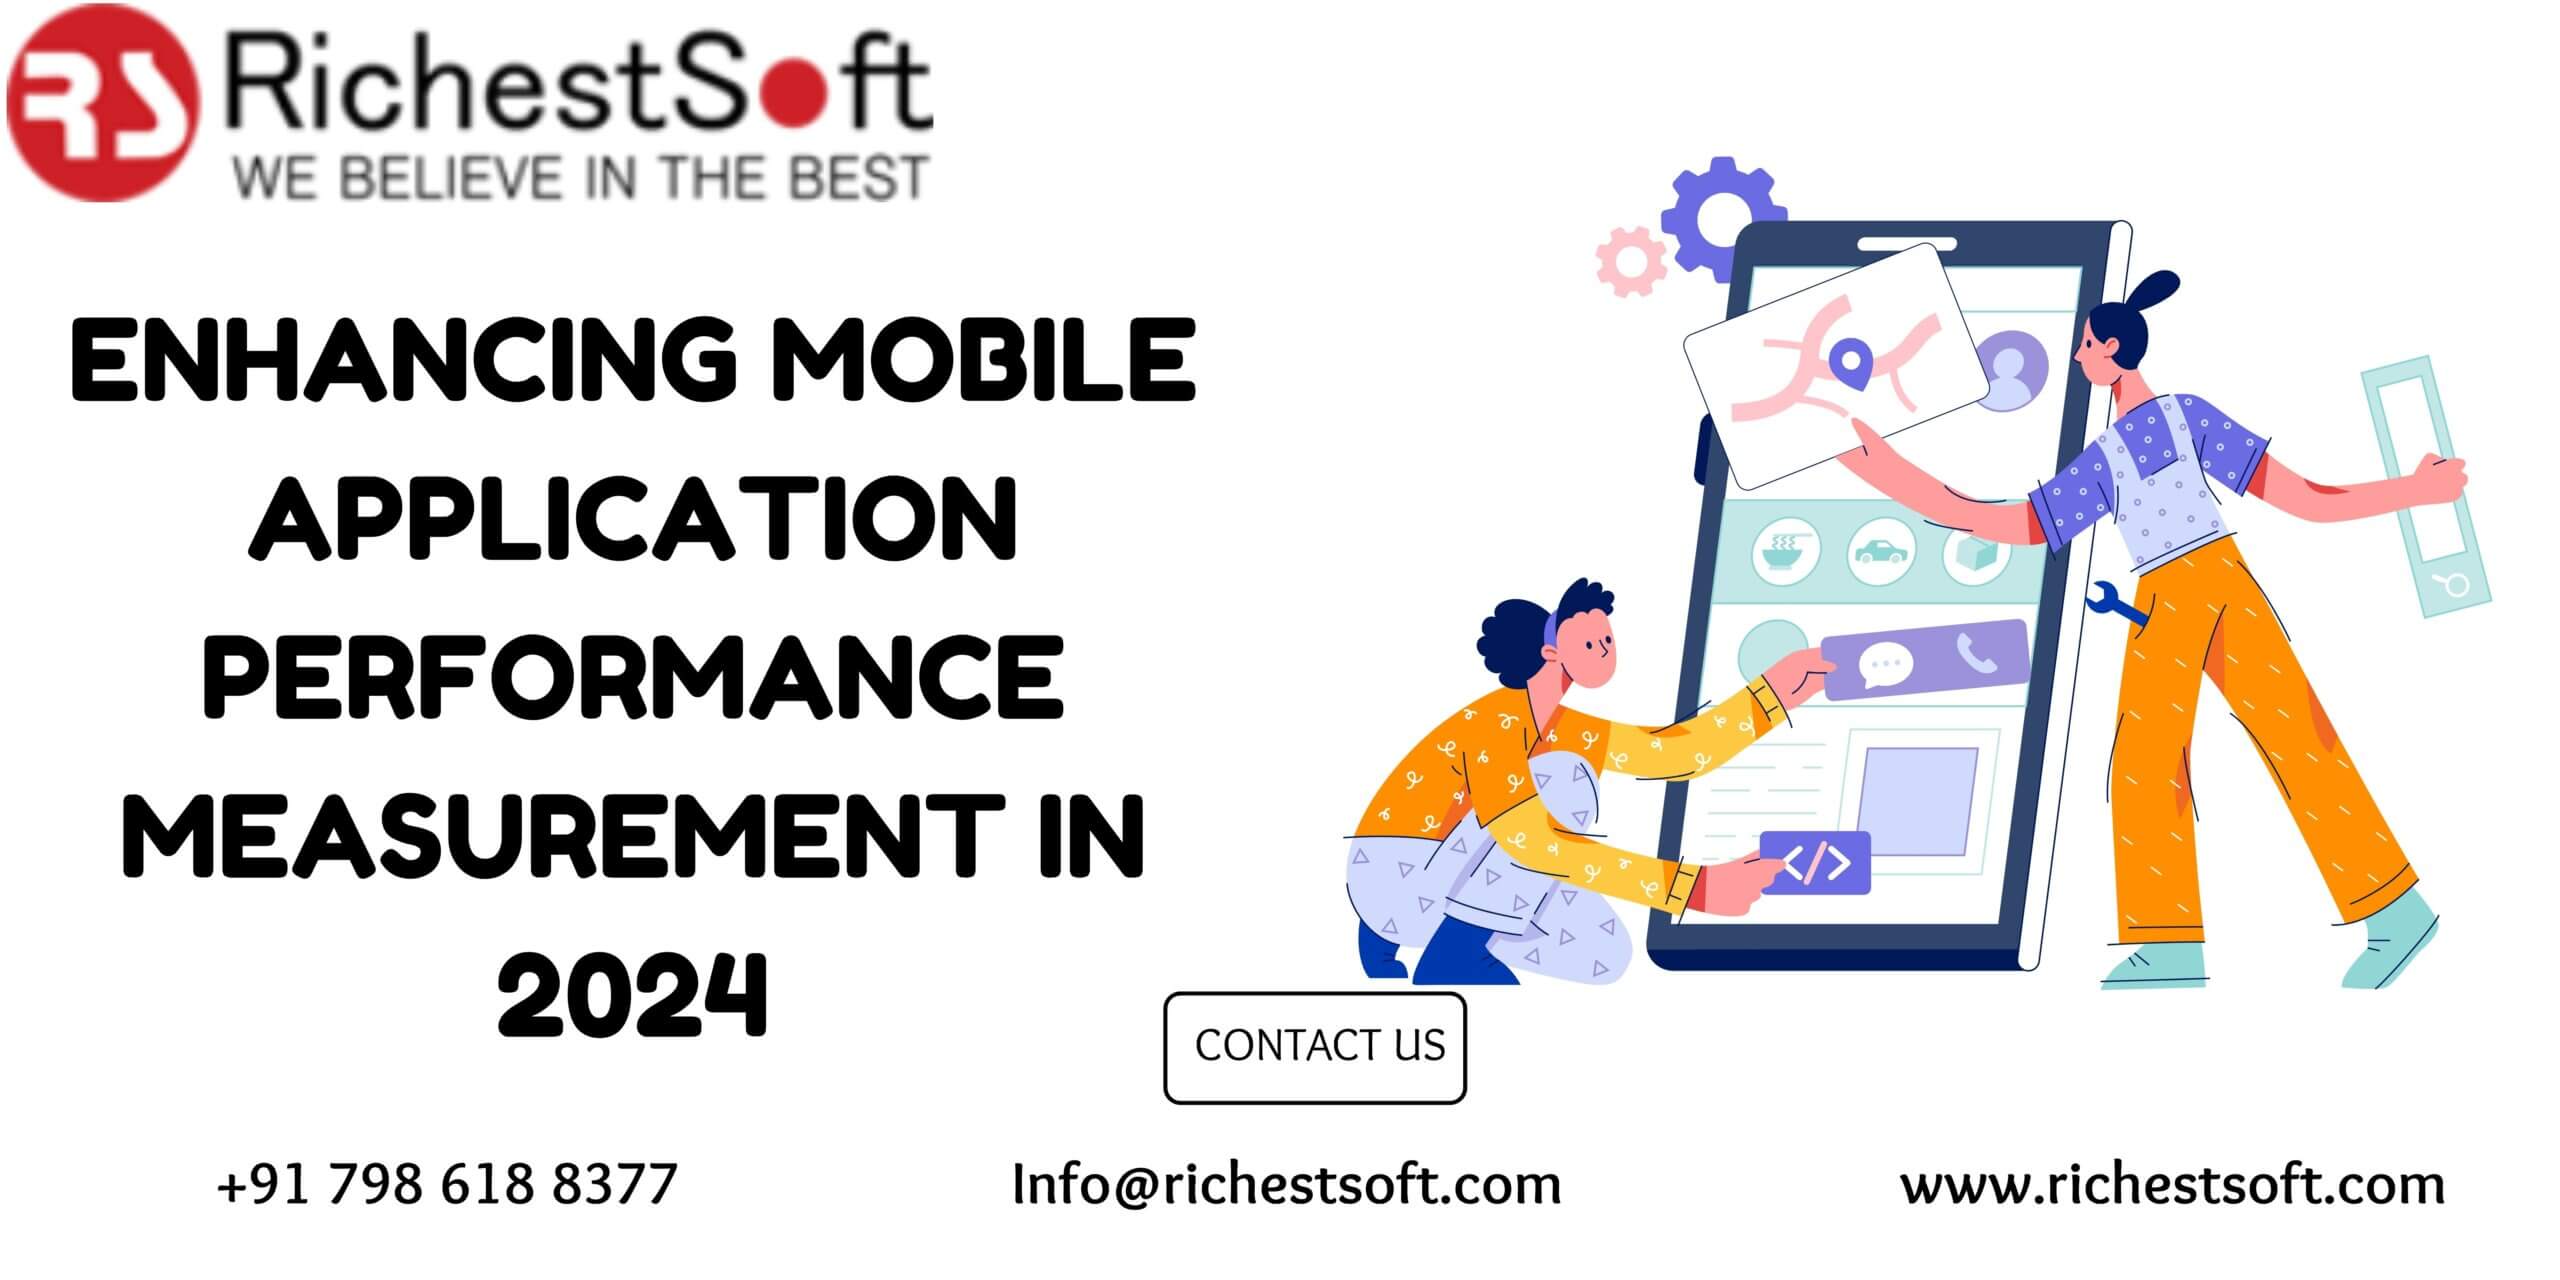 Enhancing Mobile Application Performance Measurement in 2024 - Today Community